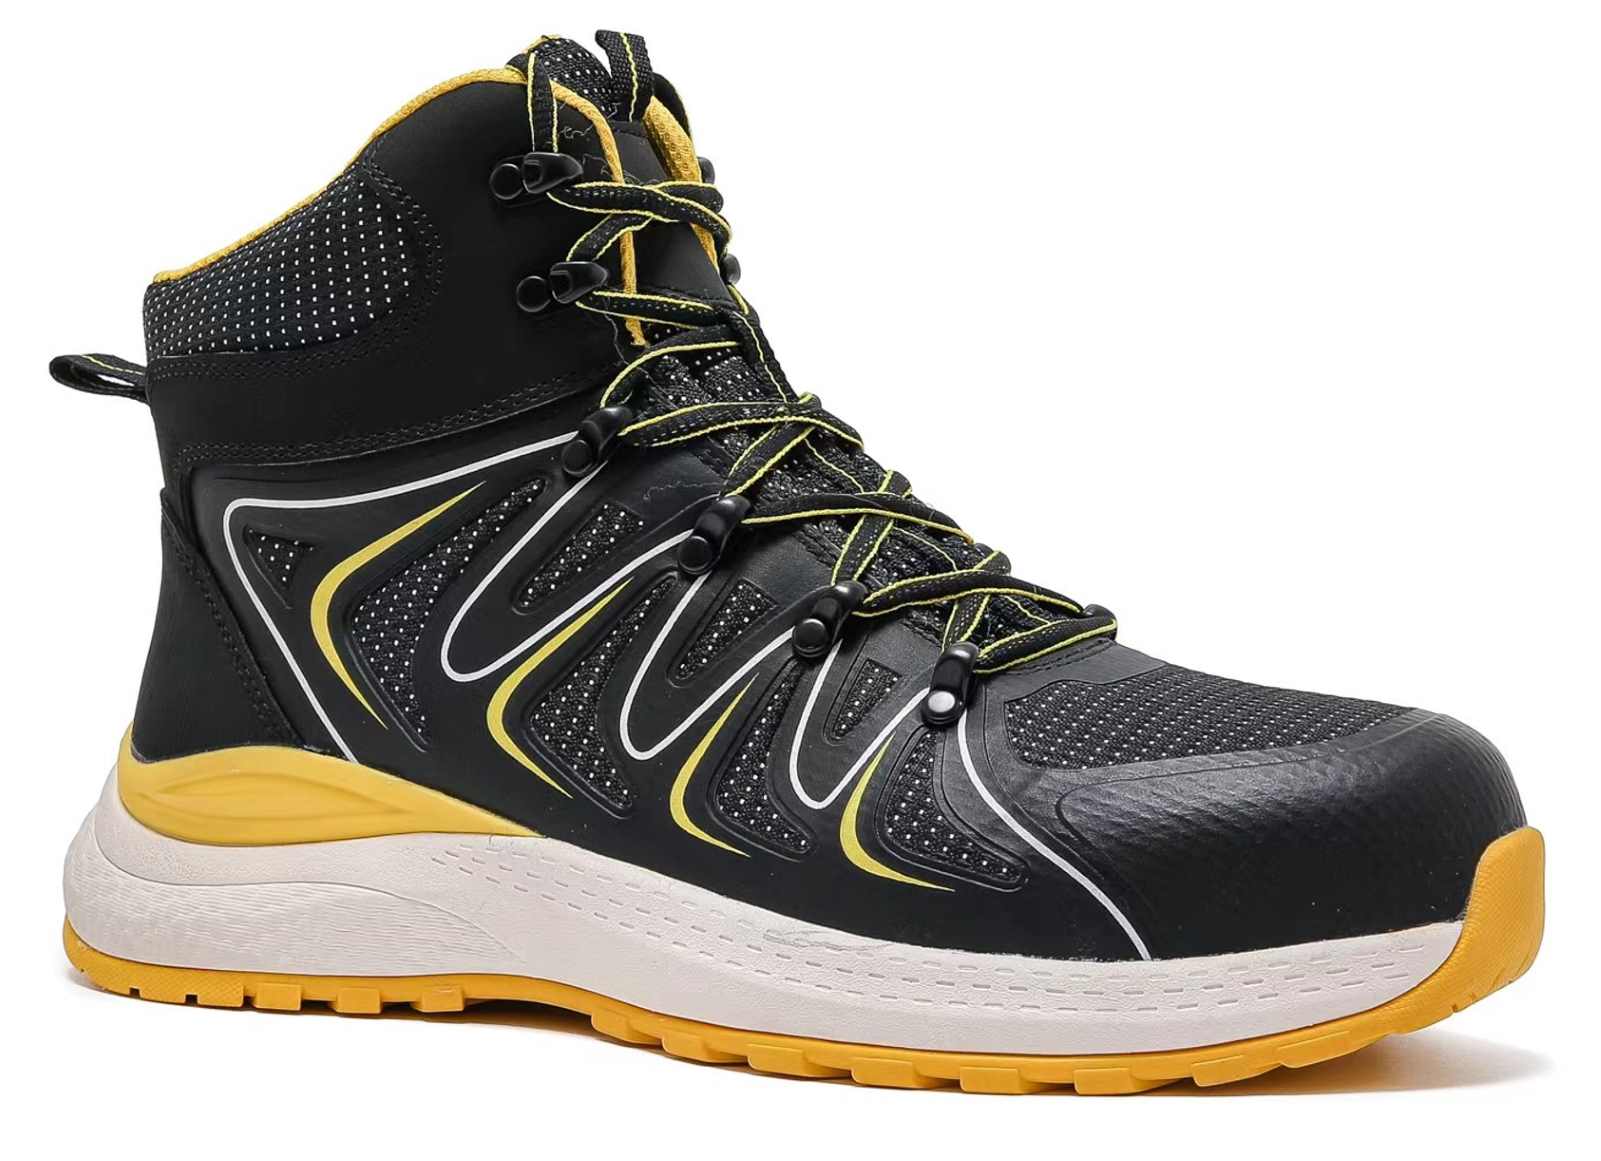 Premium Yellow Lightweight Safety Trainers with Advanced Composite Toe Cap